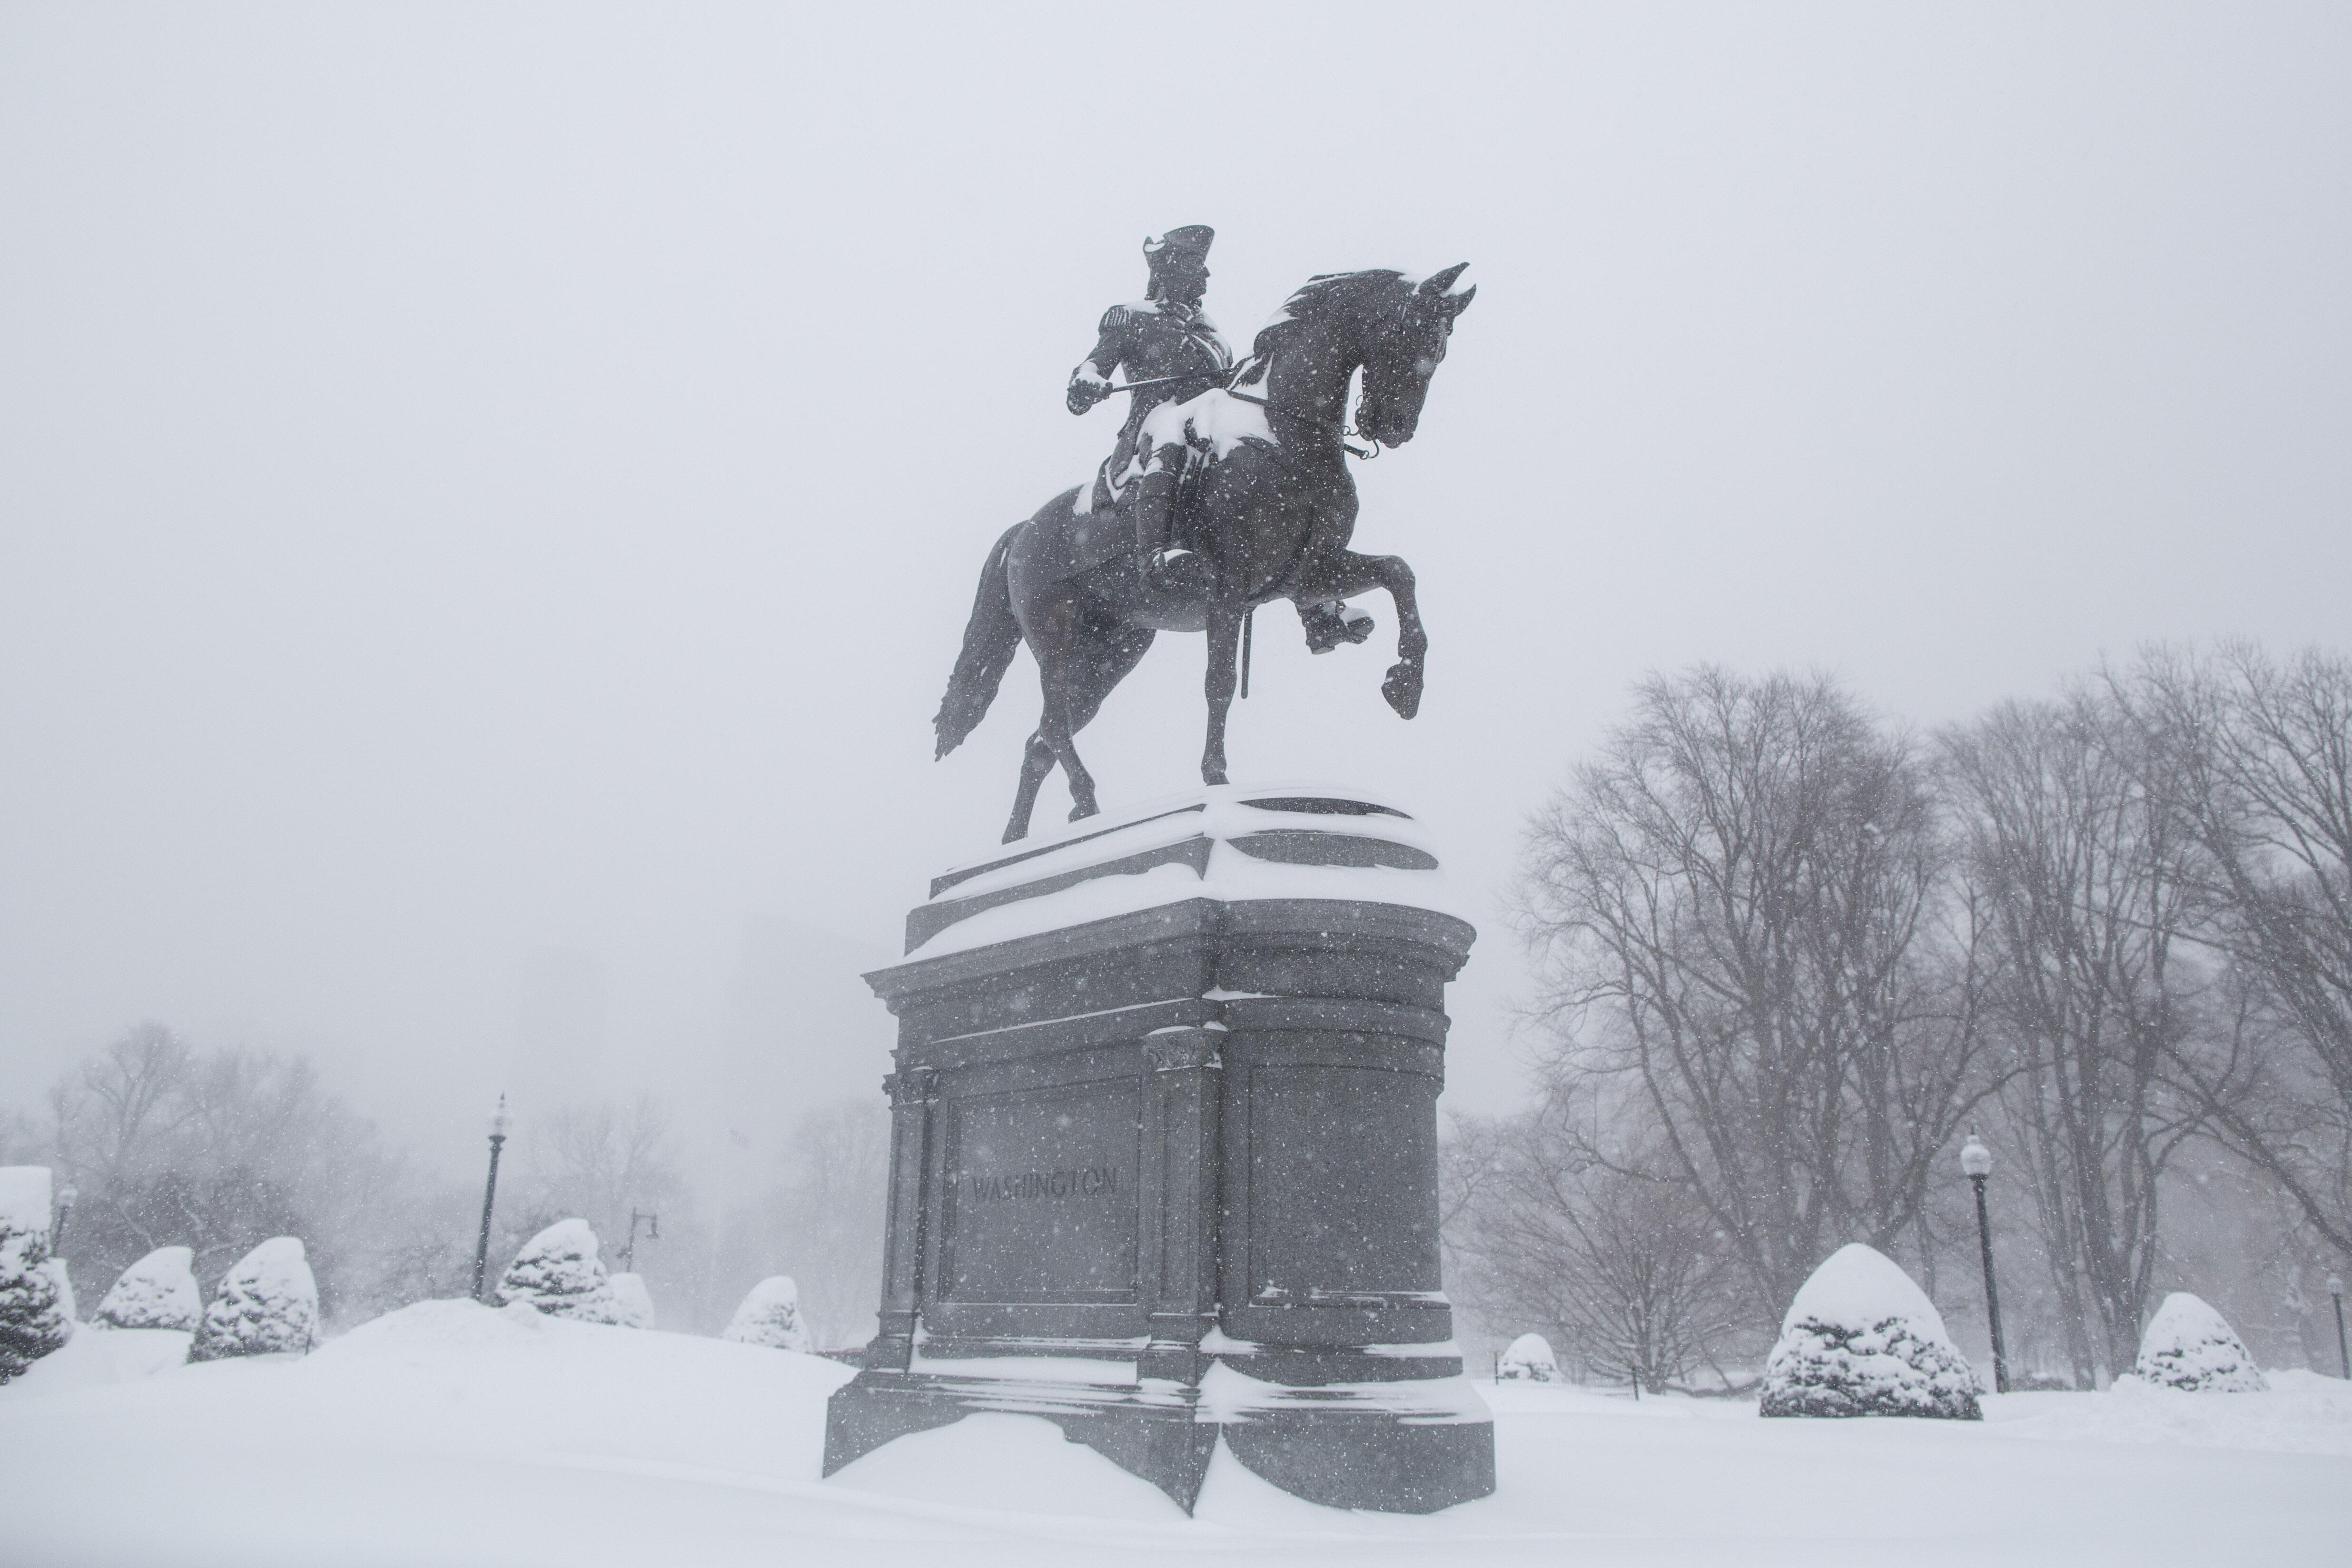 BOSTON, MA. - FEBRUARY 15: The snow covered George Washington statue in the Boston Public Garden during winter storm Neptune which dropped over a foot of snow February 15, 2015 in Boston, Massachusetts. This is the fourth major storm to hit the New Englan